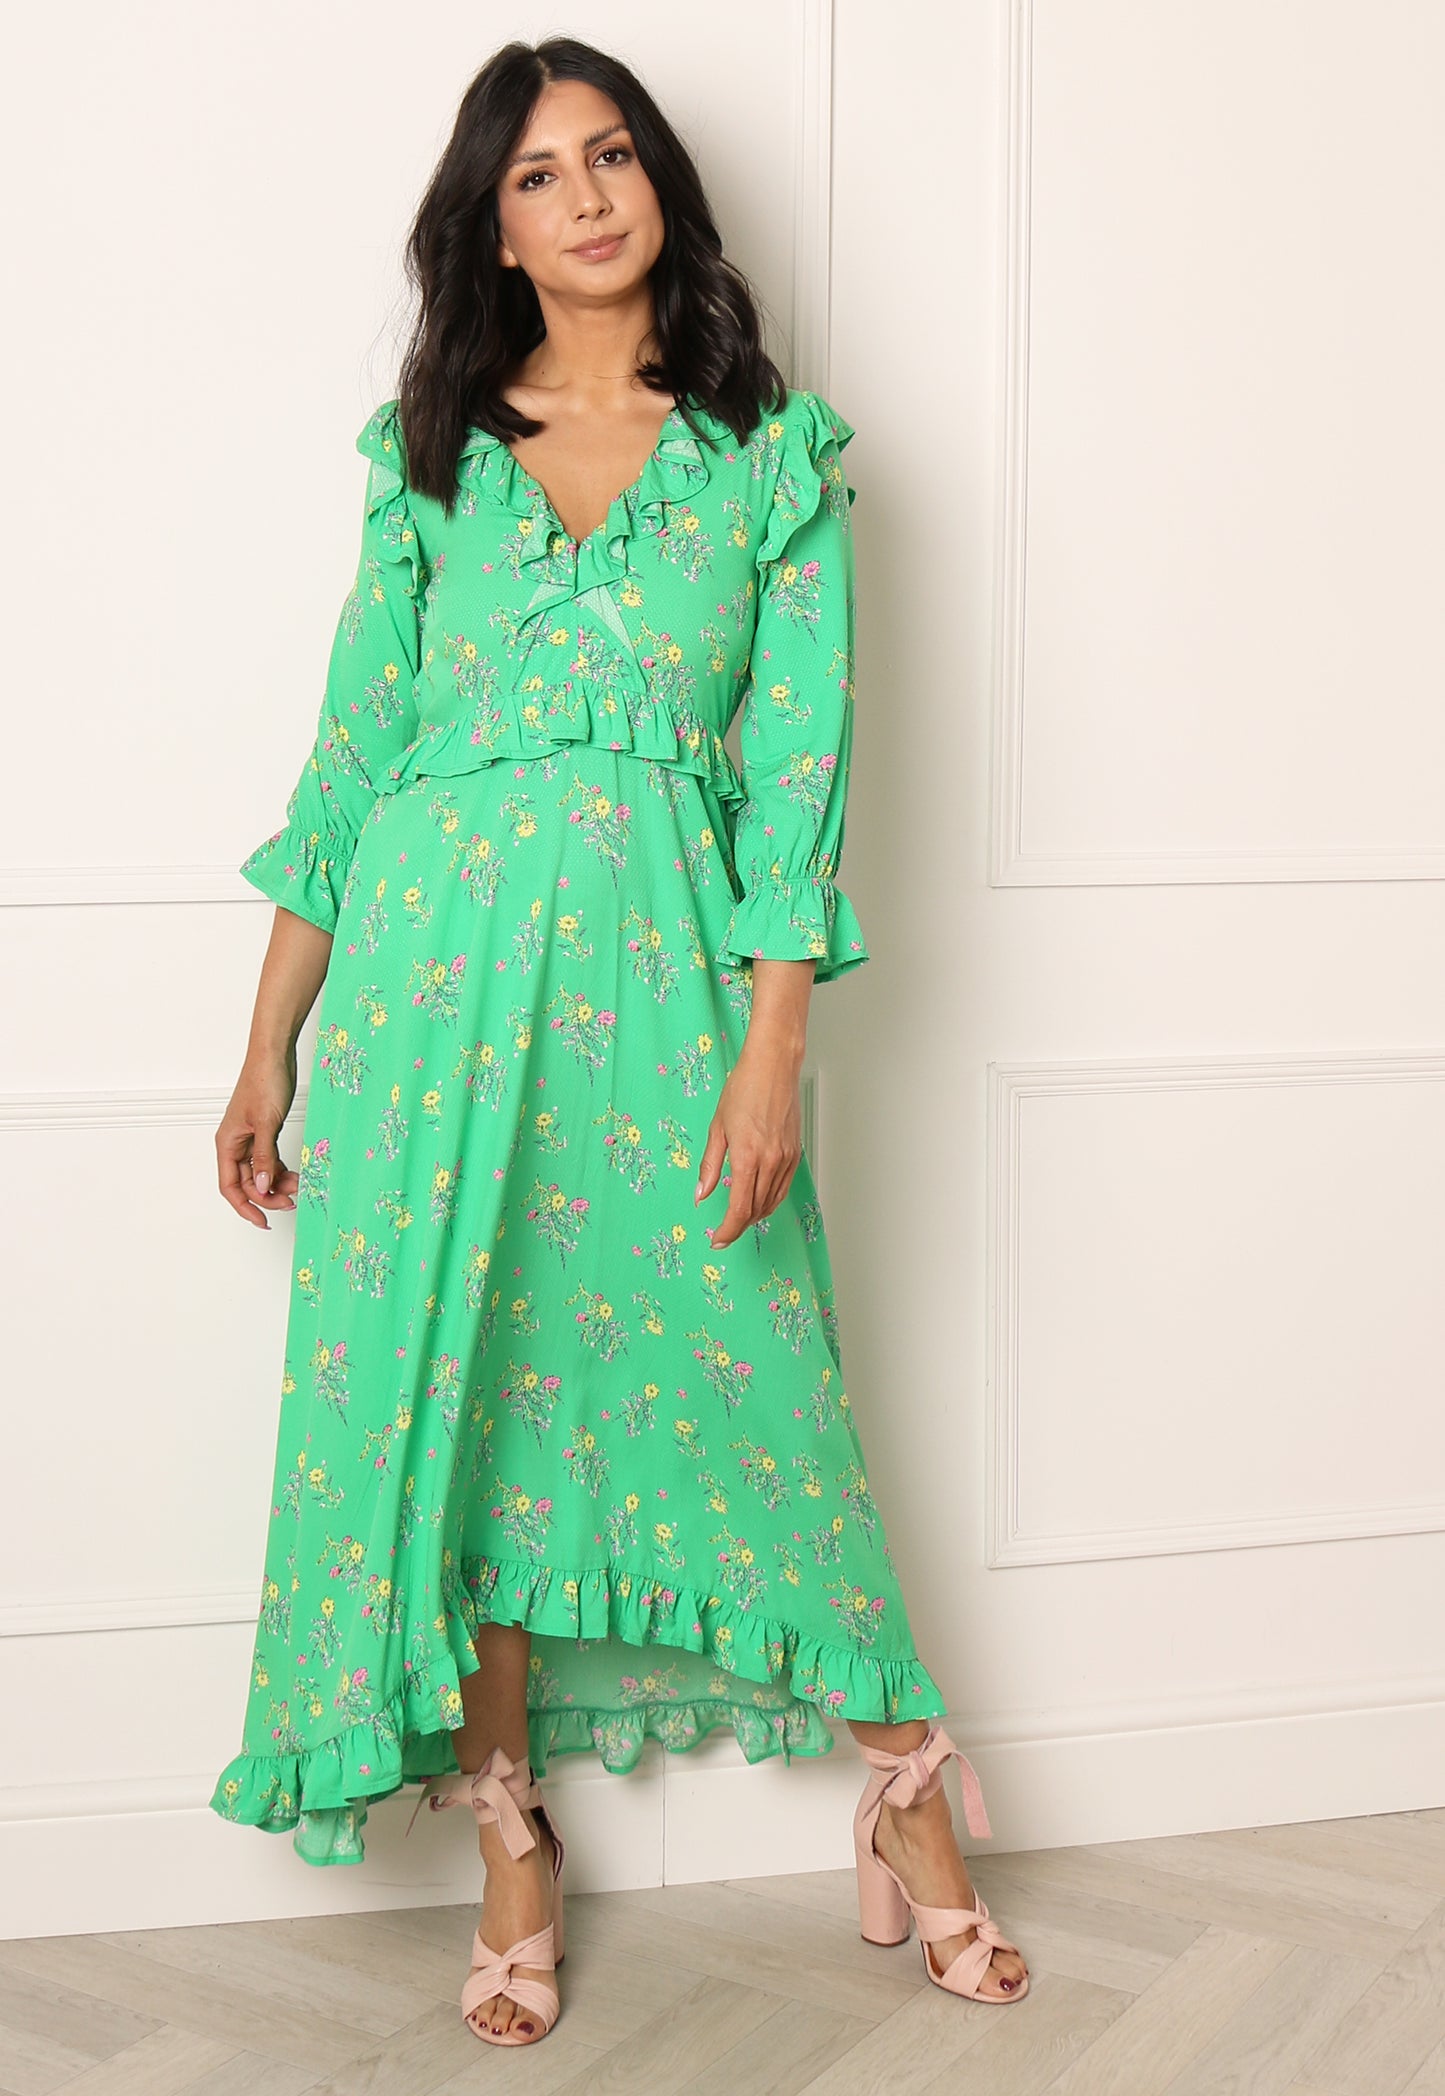 YAS Ofelia Floral Print Midaxi Dress with Frill Details in Bright Green - concretebartops